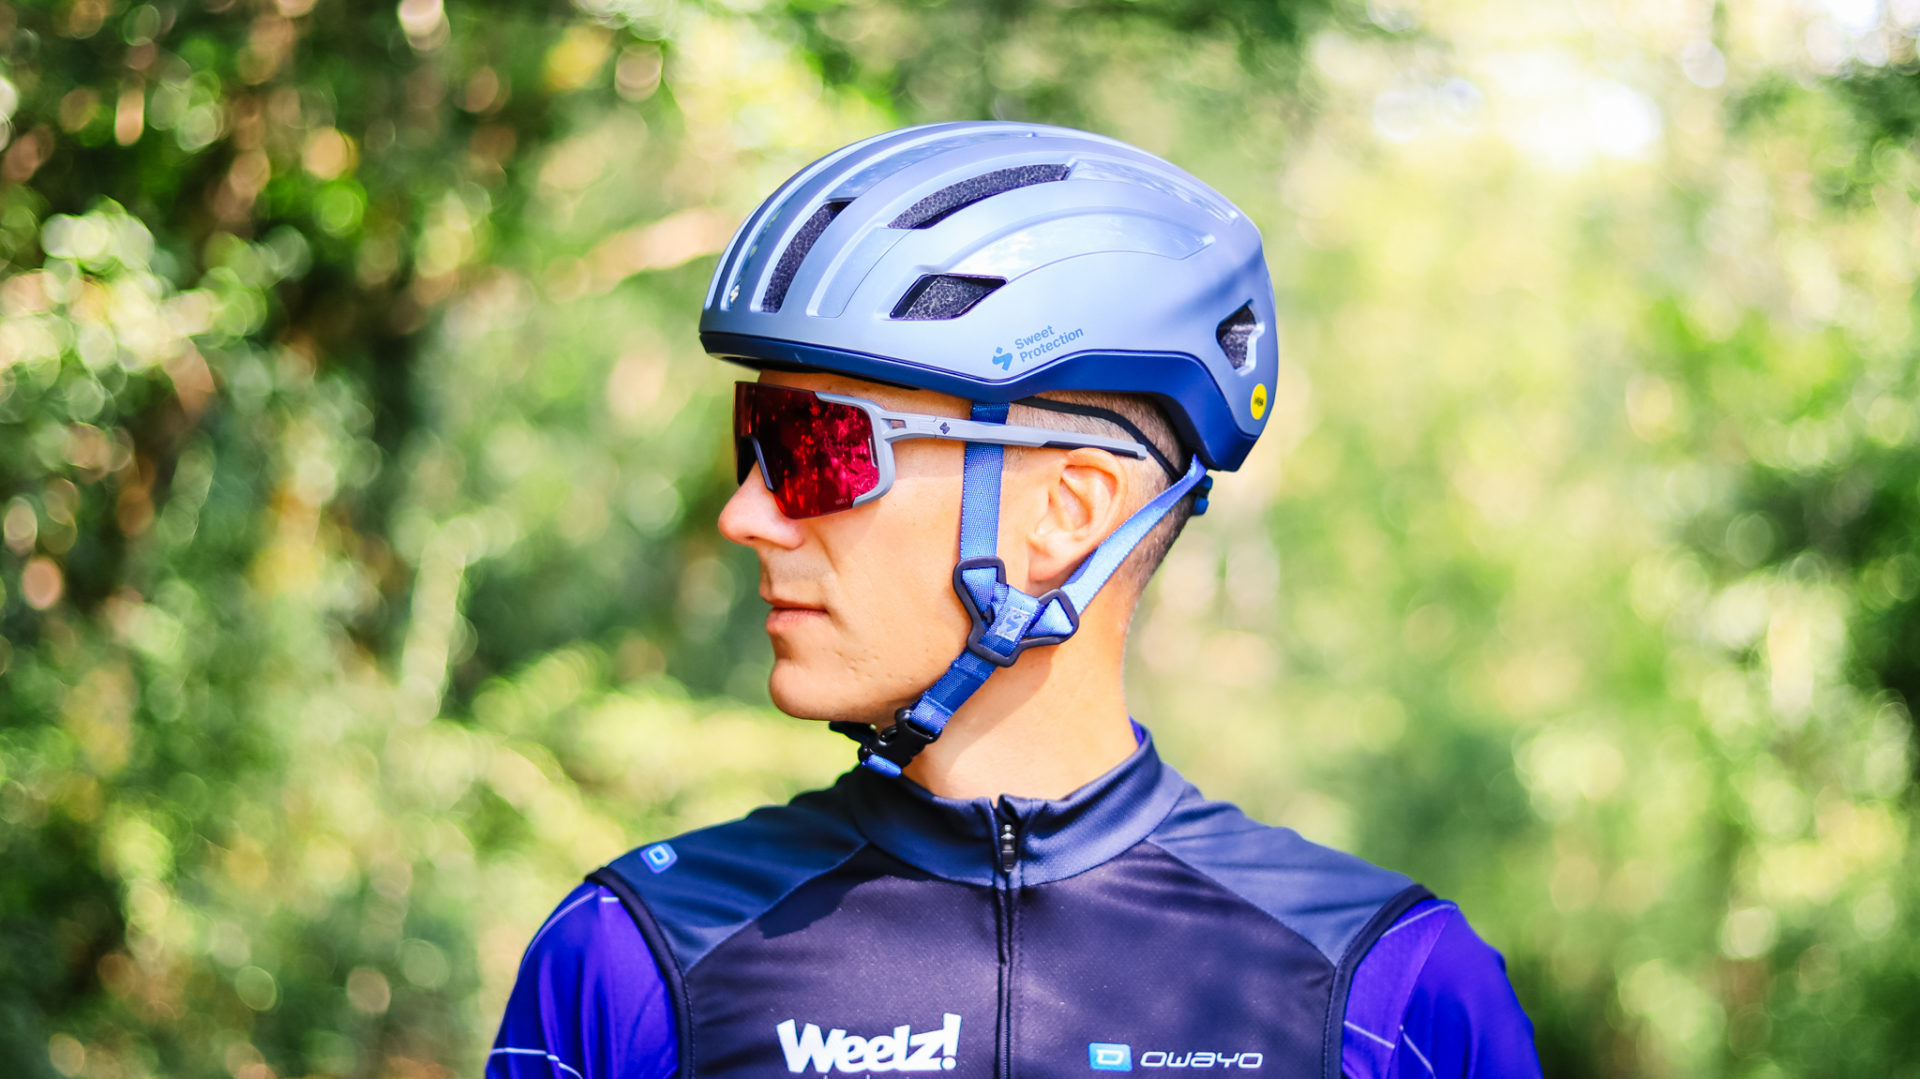 Weelz Test Casque Velo Route Sweet Protection Outrider Lunettes Ronin Rig 2021 9912